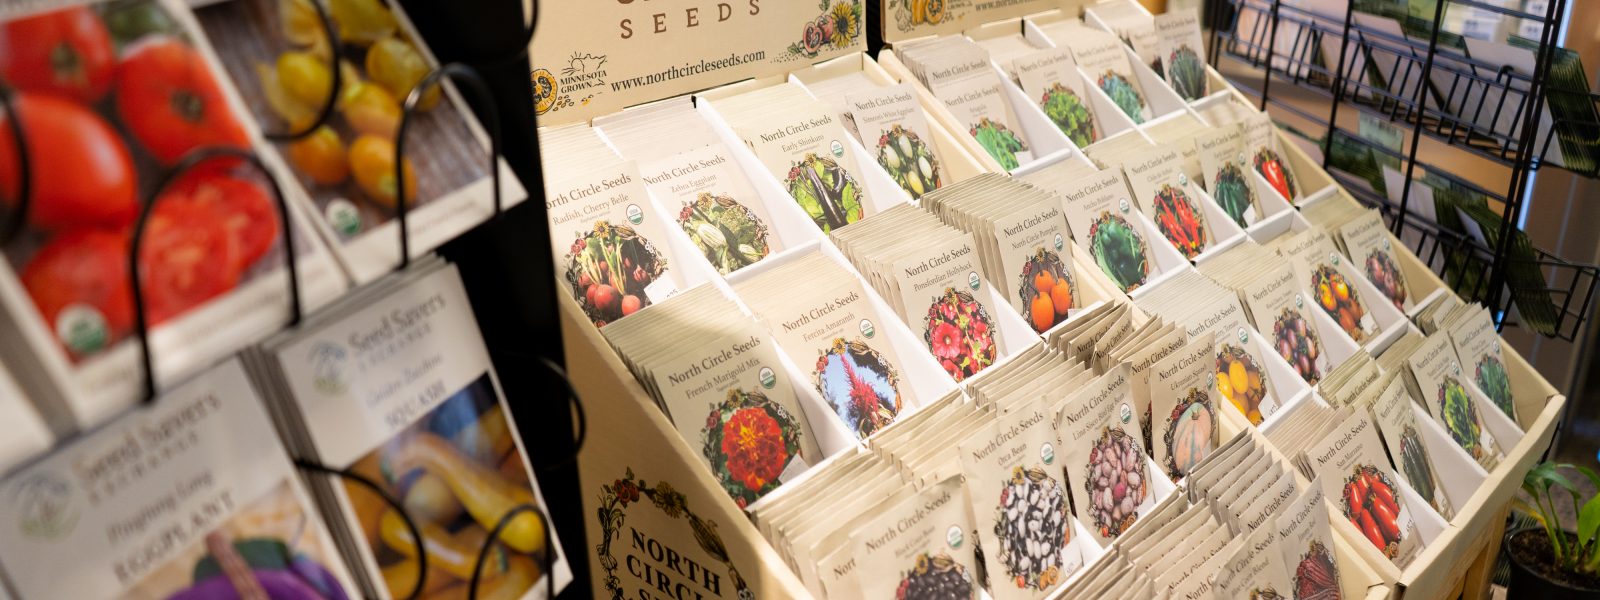 A variety of seed packets on a dislpay